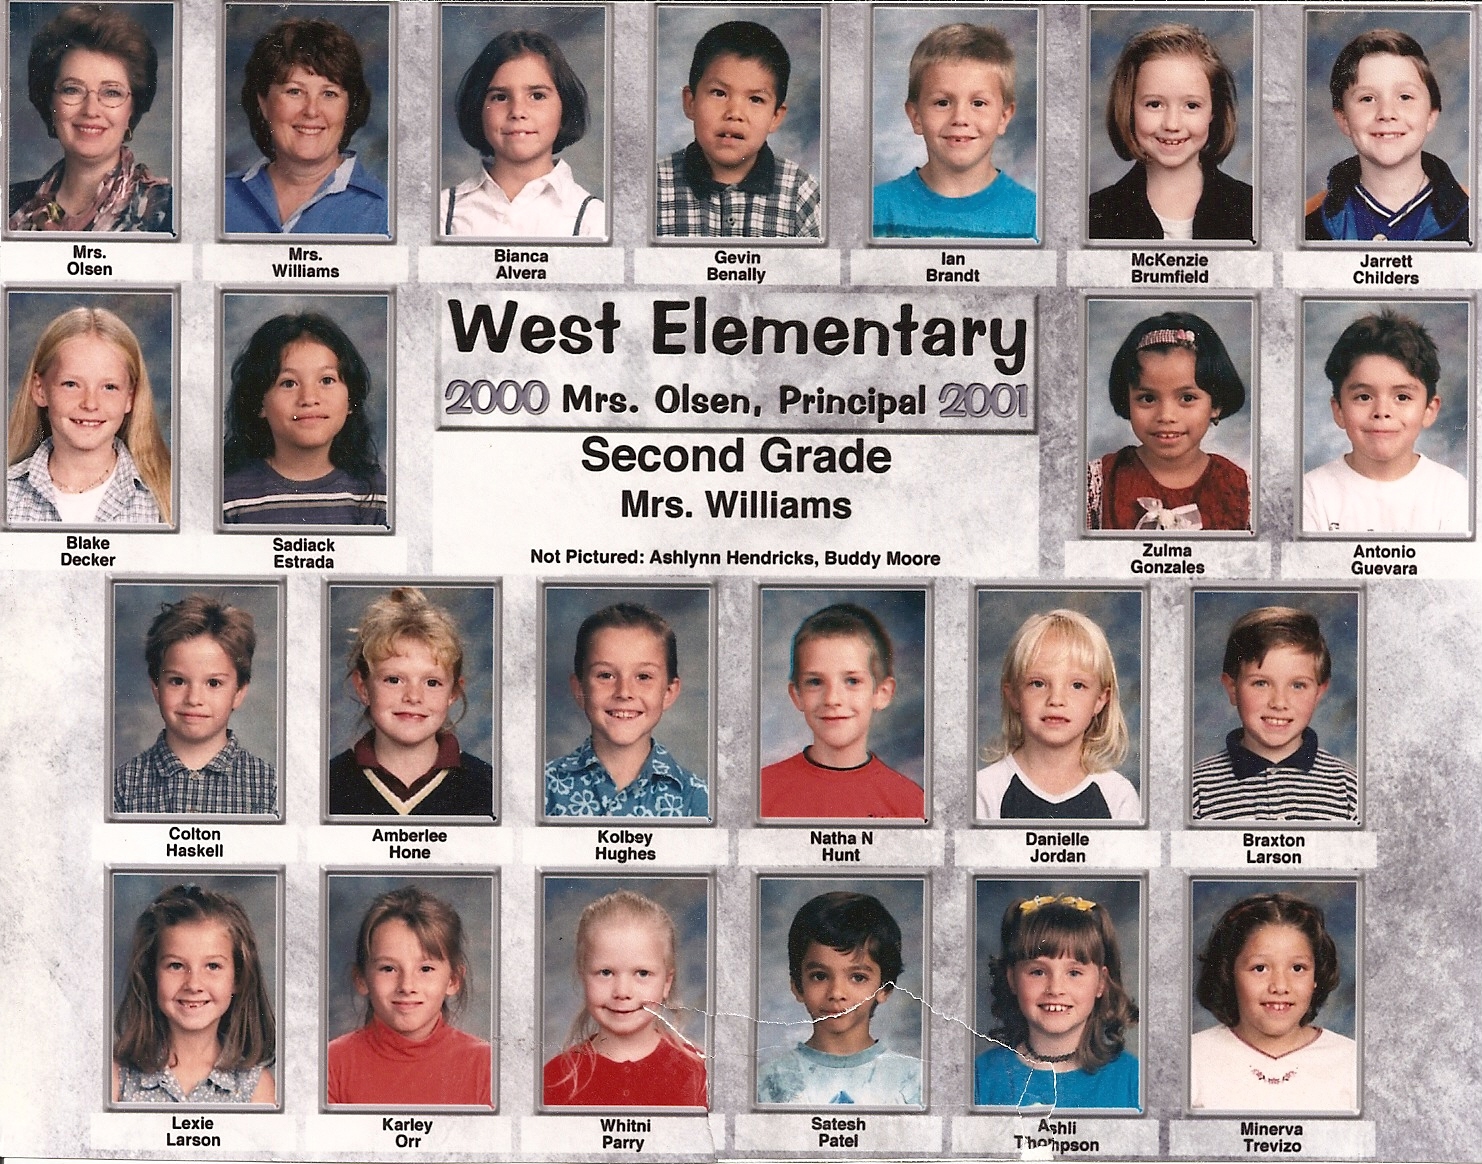 Mrs. Sue Williams' 2000-2001 second grade class at West Elementary School